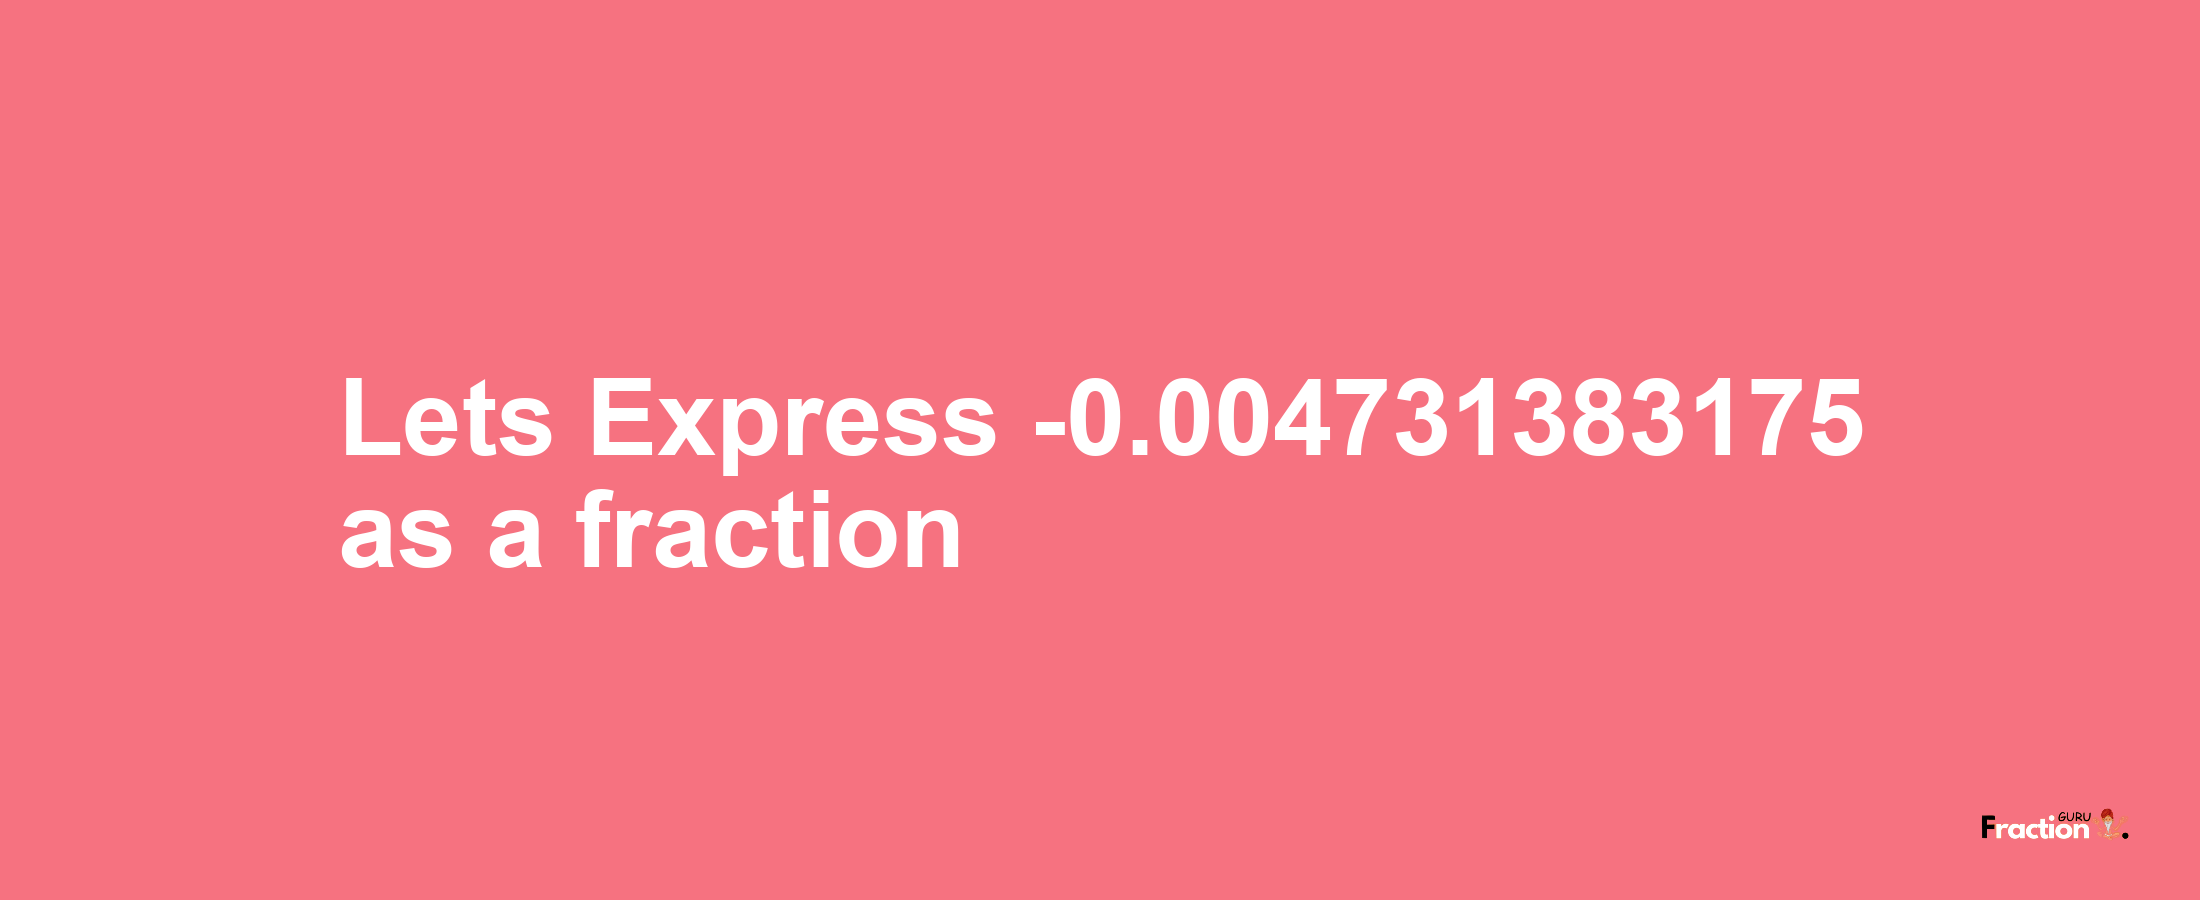 Lets Express -0.004731383175 as afraction